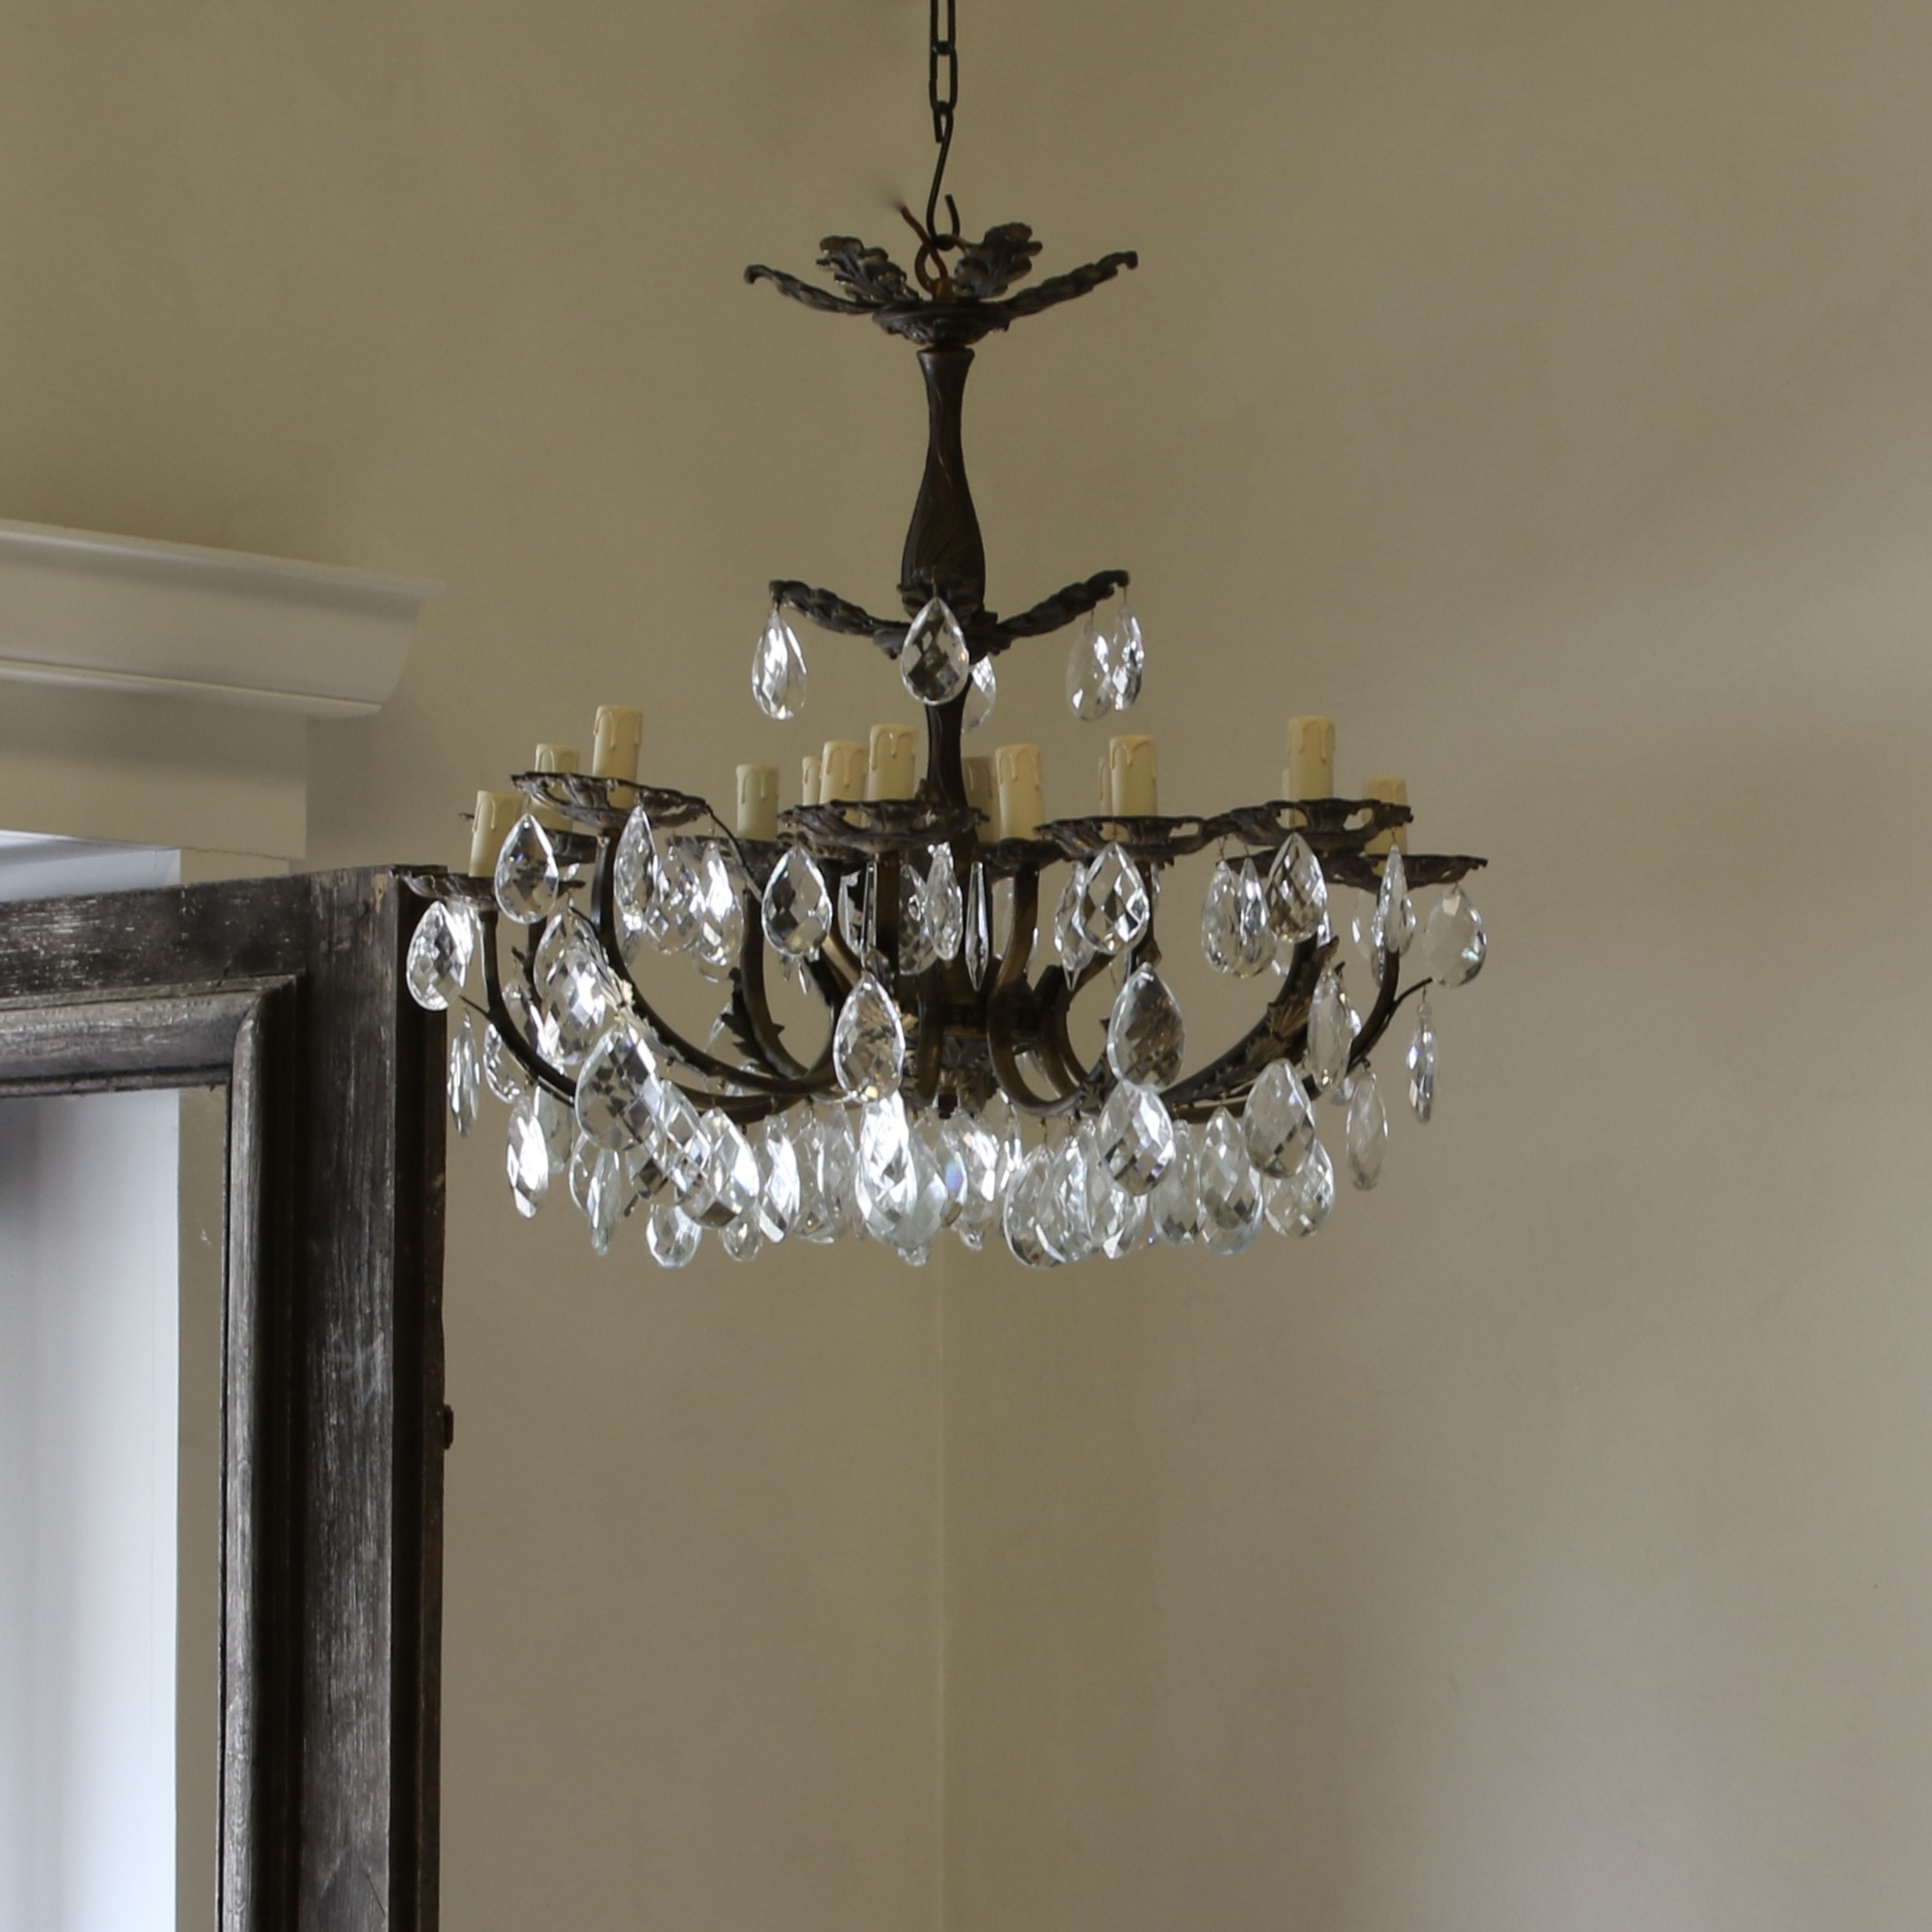 A French Antique Chandelier